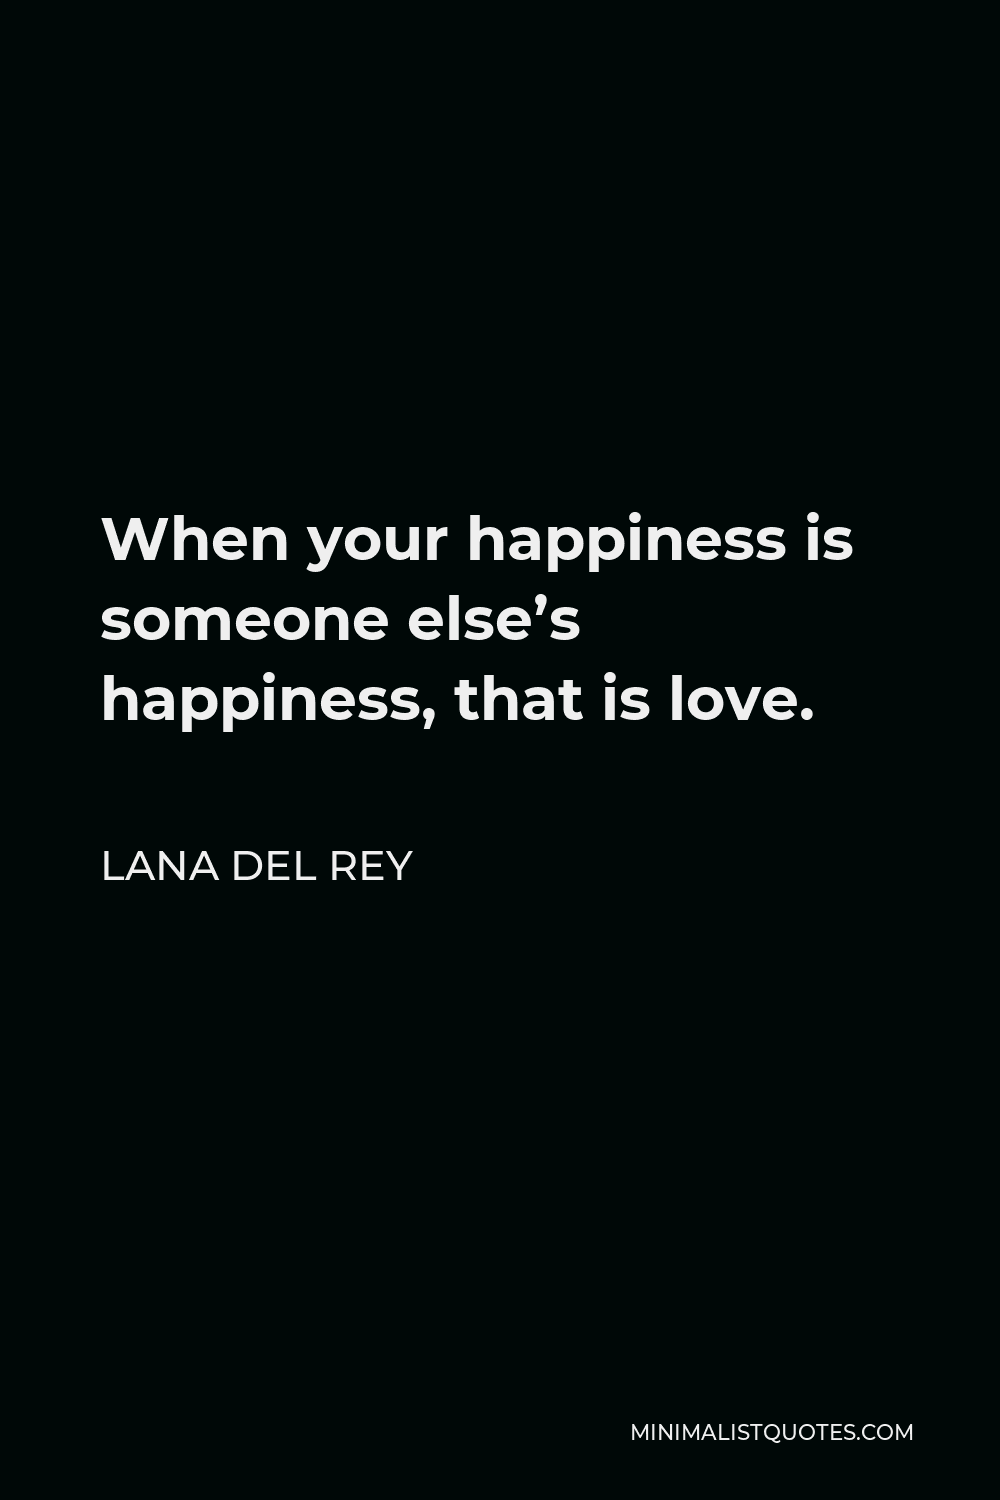 Lana Del Rey Quote - When your happiness is someone else’s happiness, that is love.